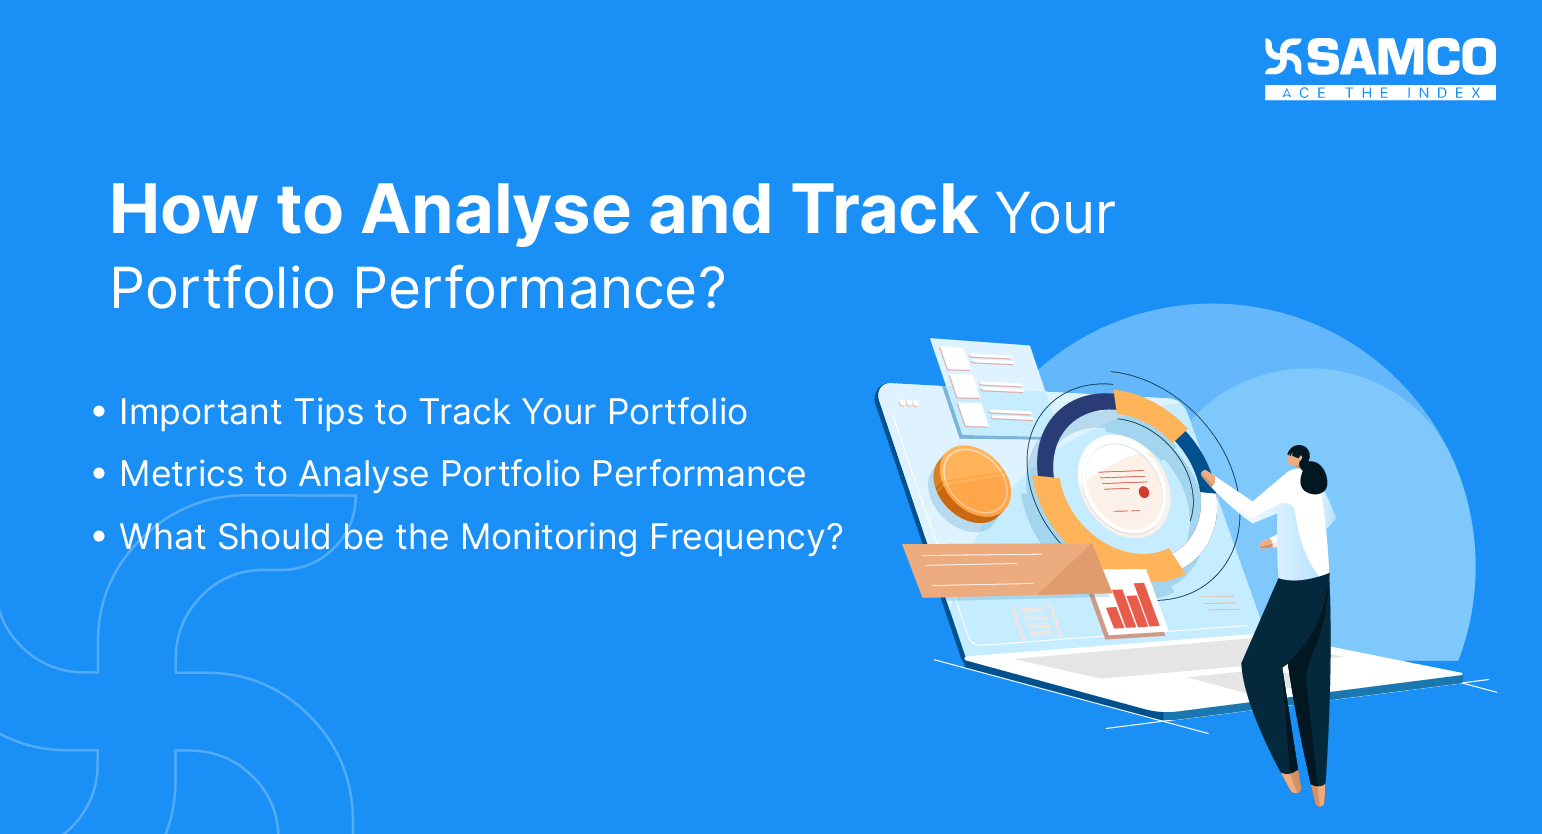 How to Analyse and Track Your Portfolio Performance